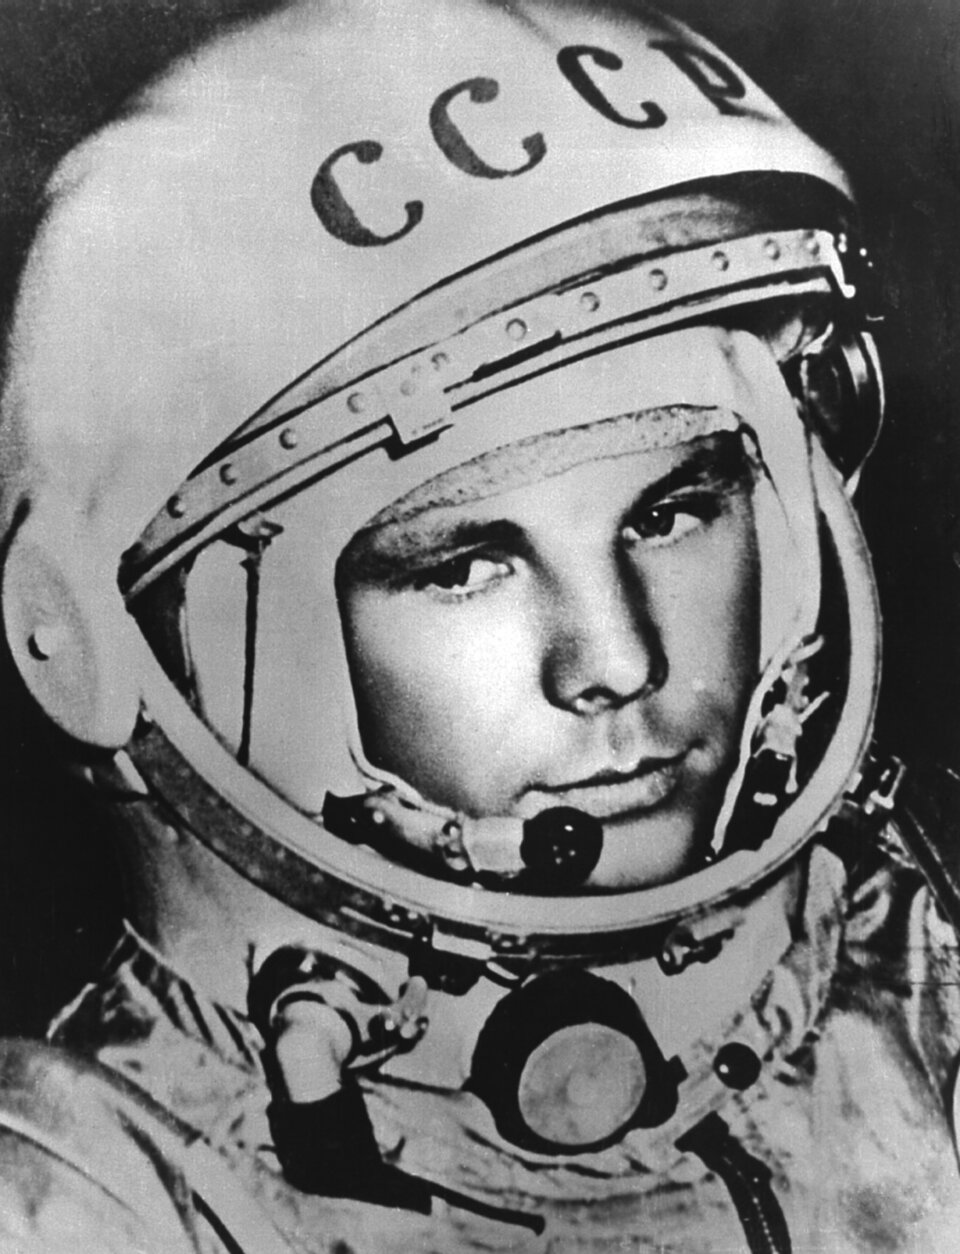 The iconic image of the first space explorer